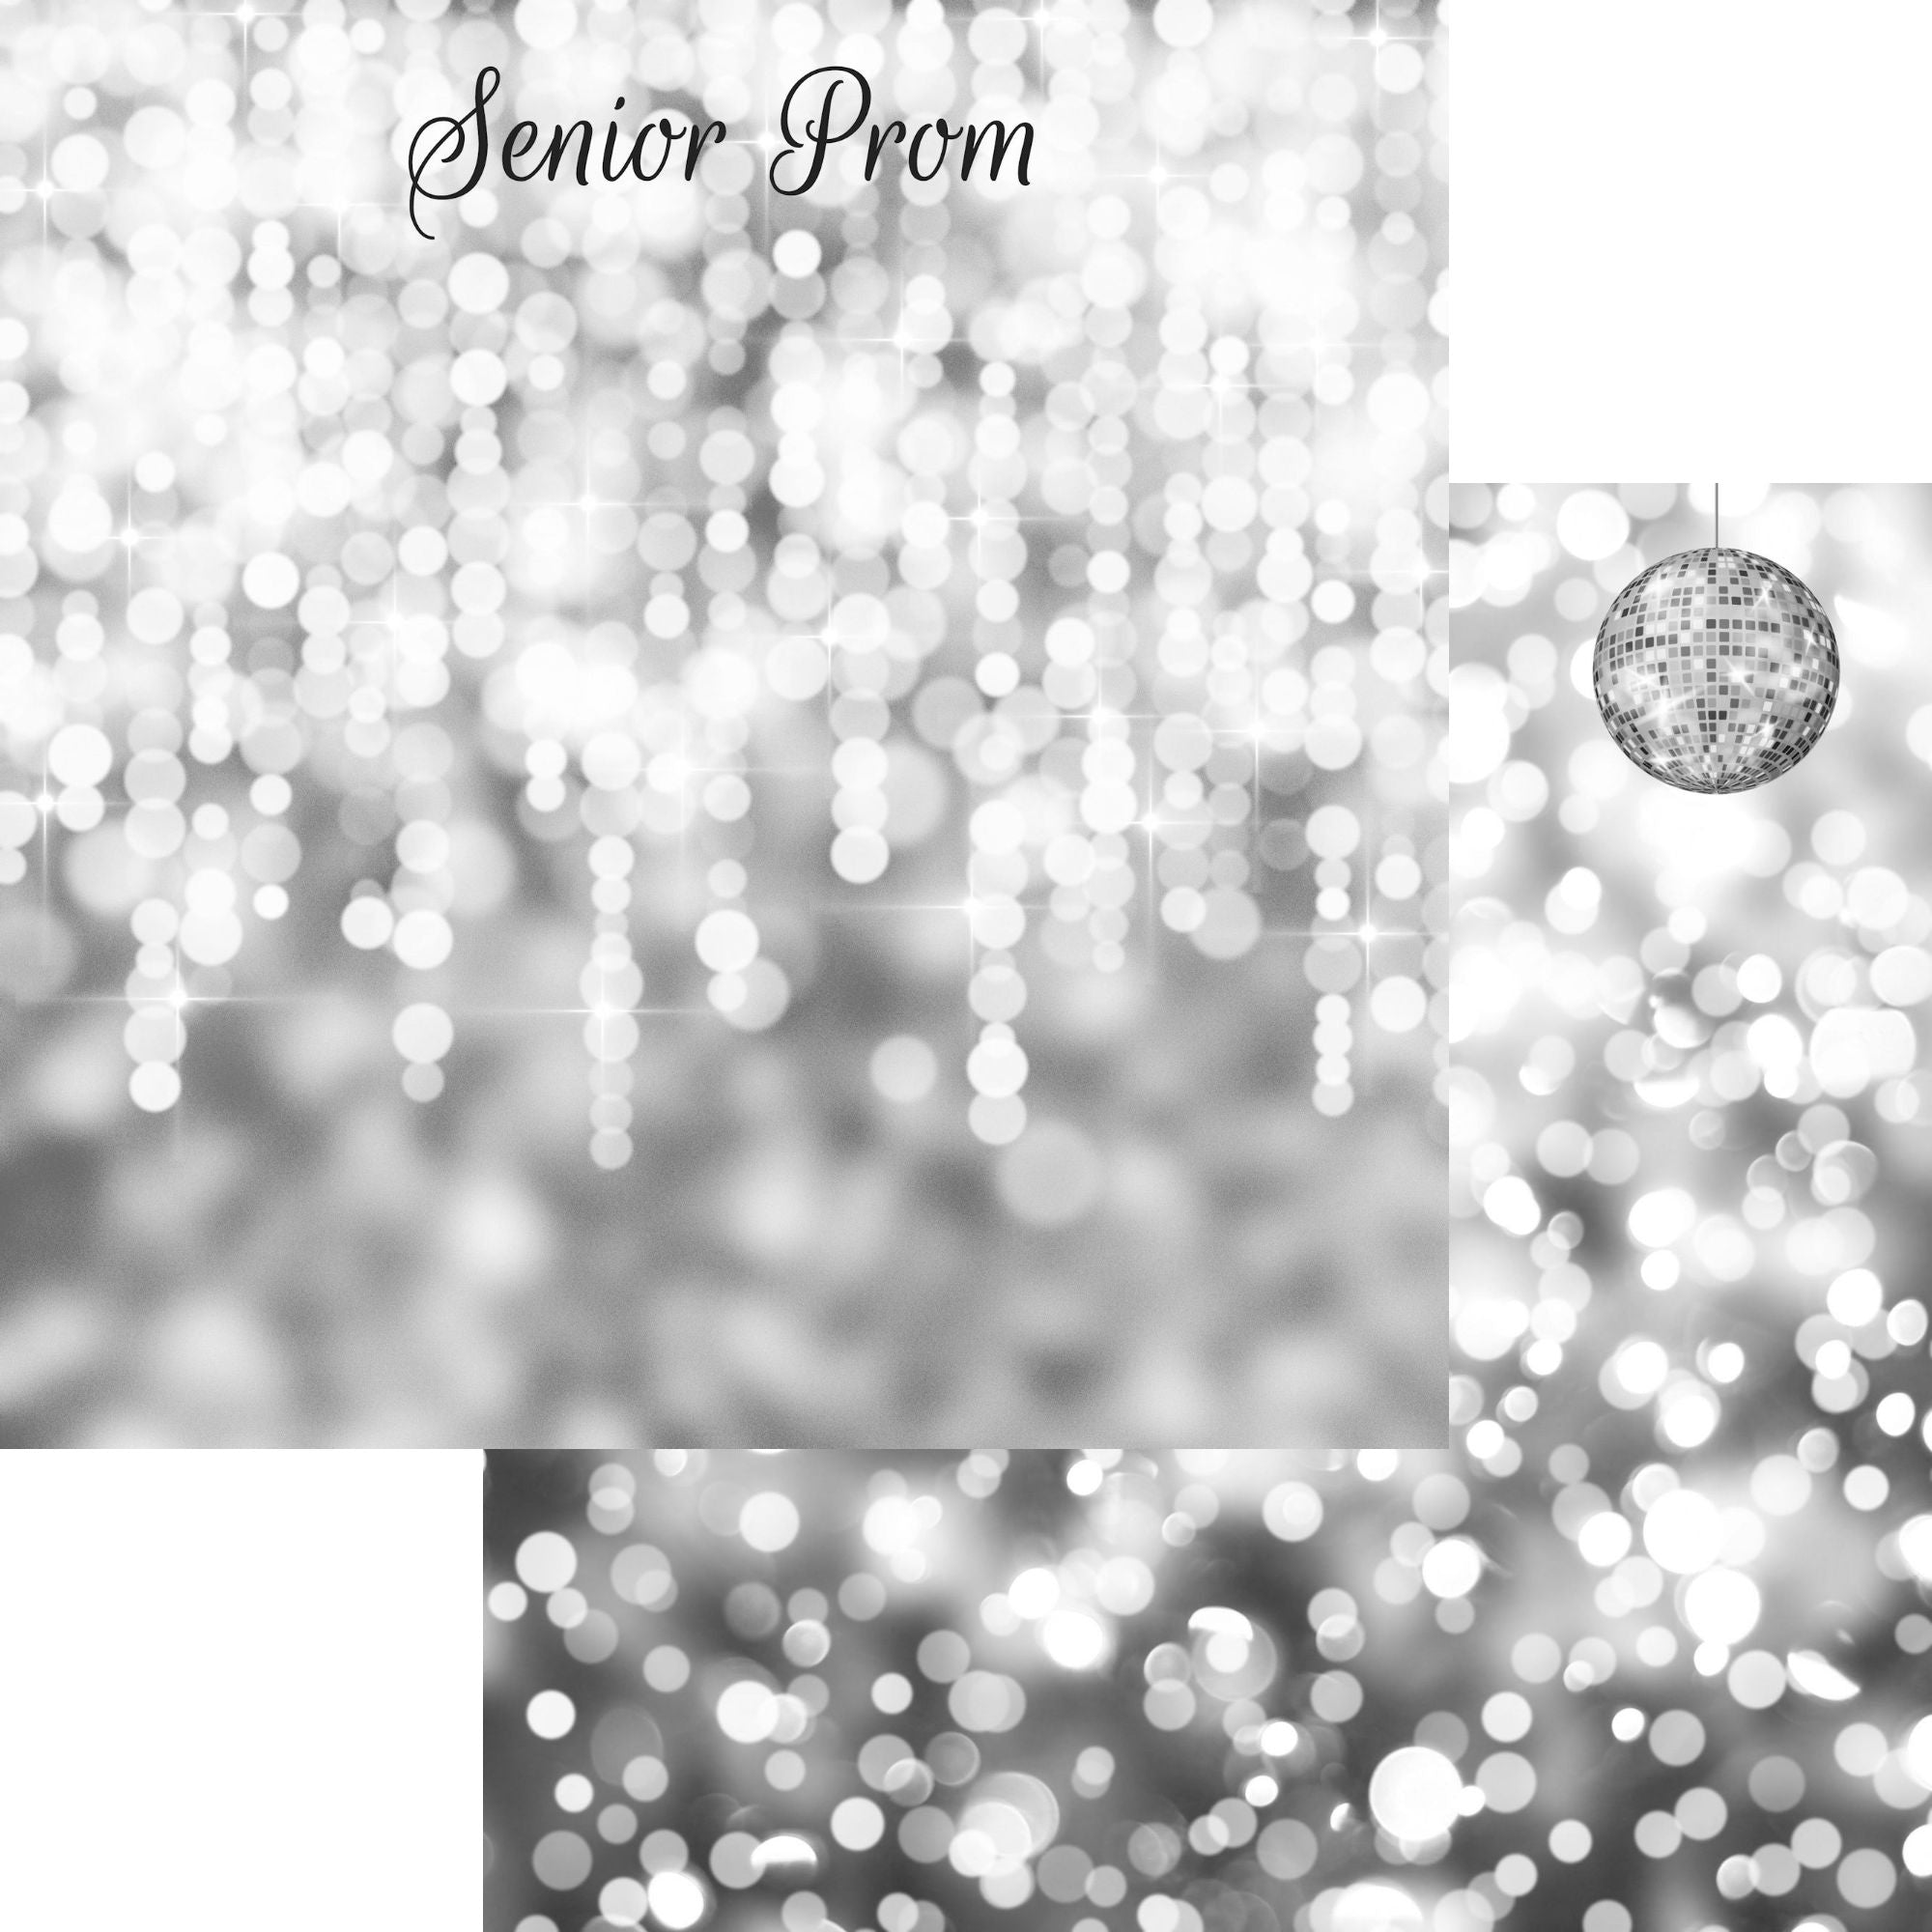 Prom Night Collection Senior Prom 12 x 12 Double-Sided Scrapbook Paper by SSC Designs